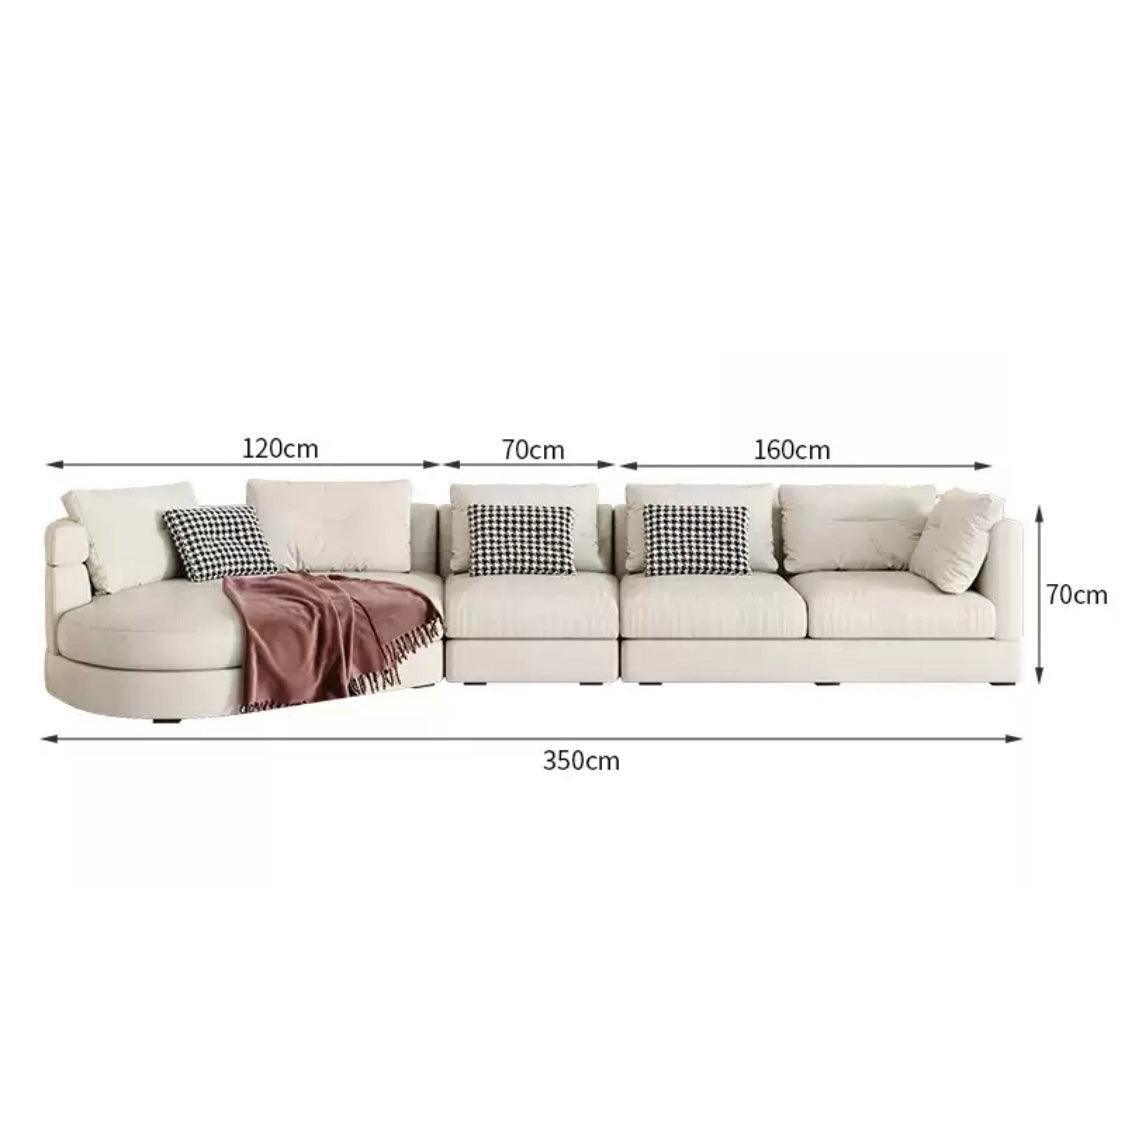 home-atelier-f31a Suede Fabric / Length 350cm with curve chaise / Cream Baxter Designer Sectional Round Chaise Sofa